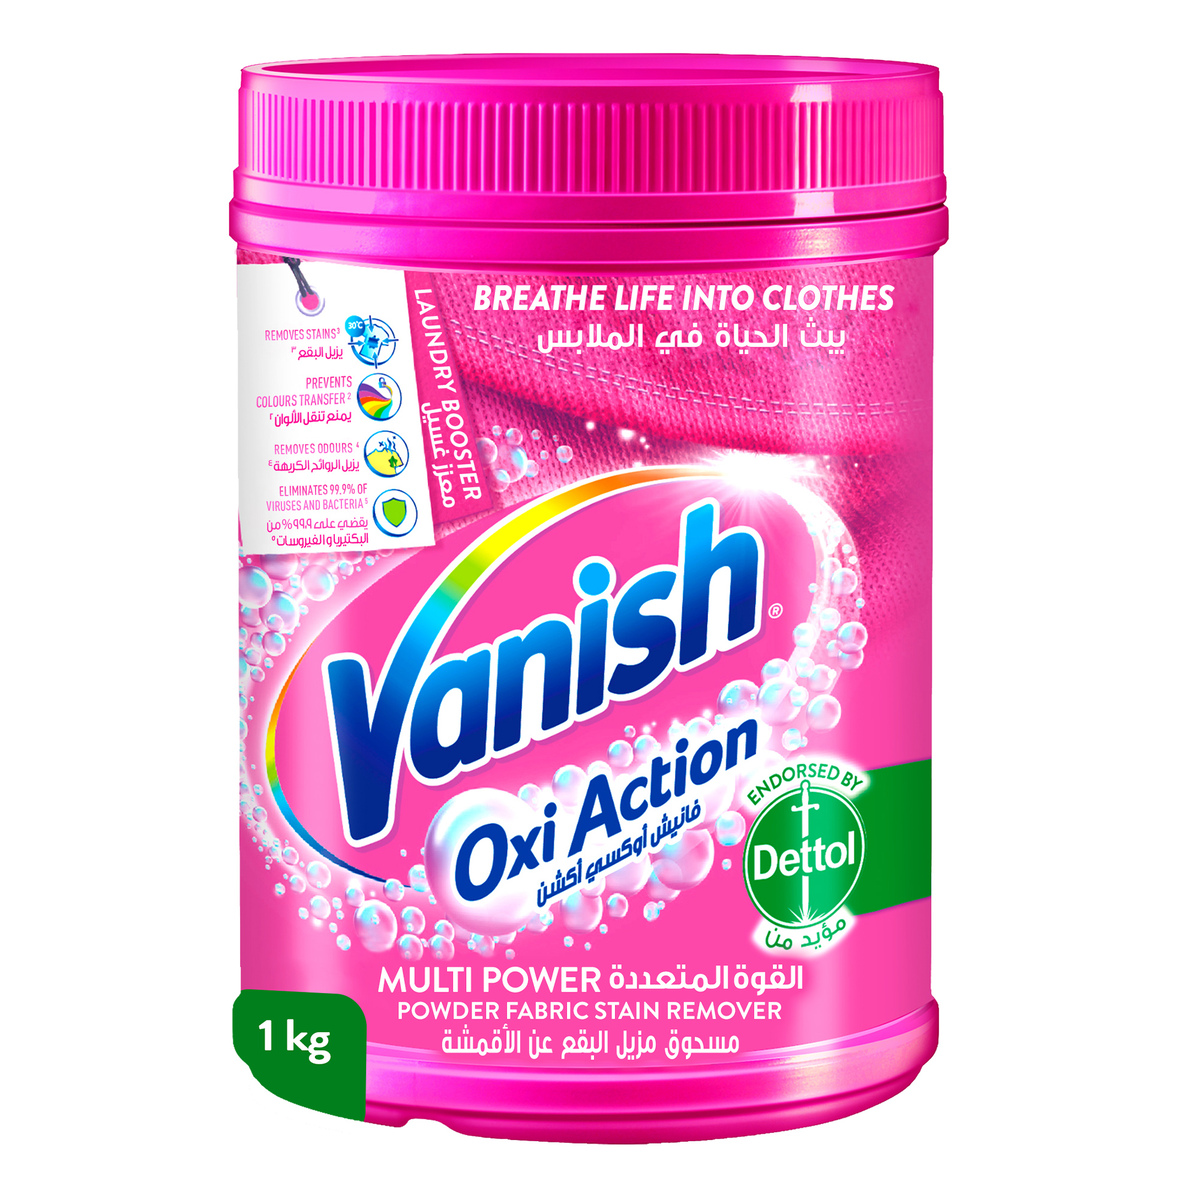 Buy Vanish Oxi Action Multipower Fabric Stain Remover Powder 1 kg Online at Best Price | Stain Removers | Lulu KSA in UAE